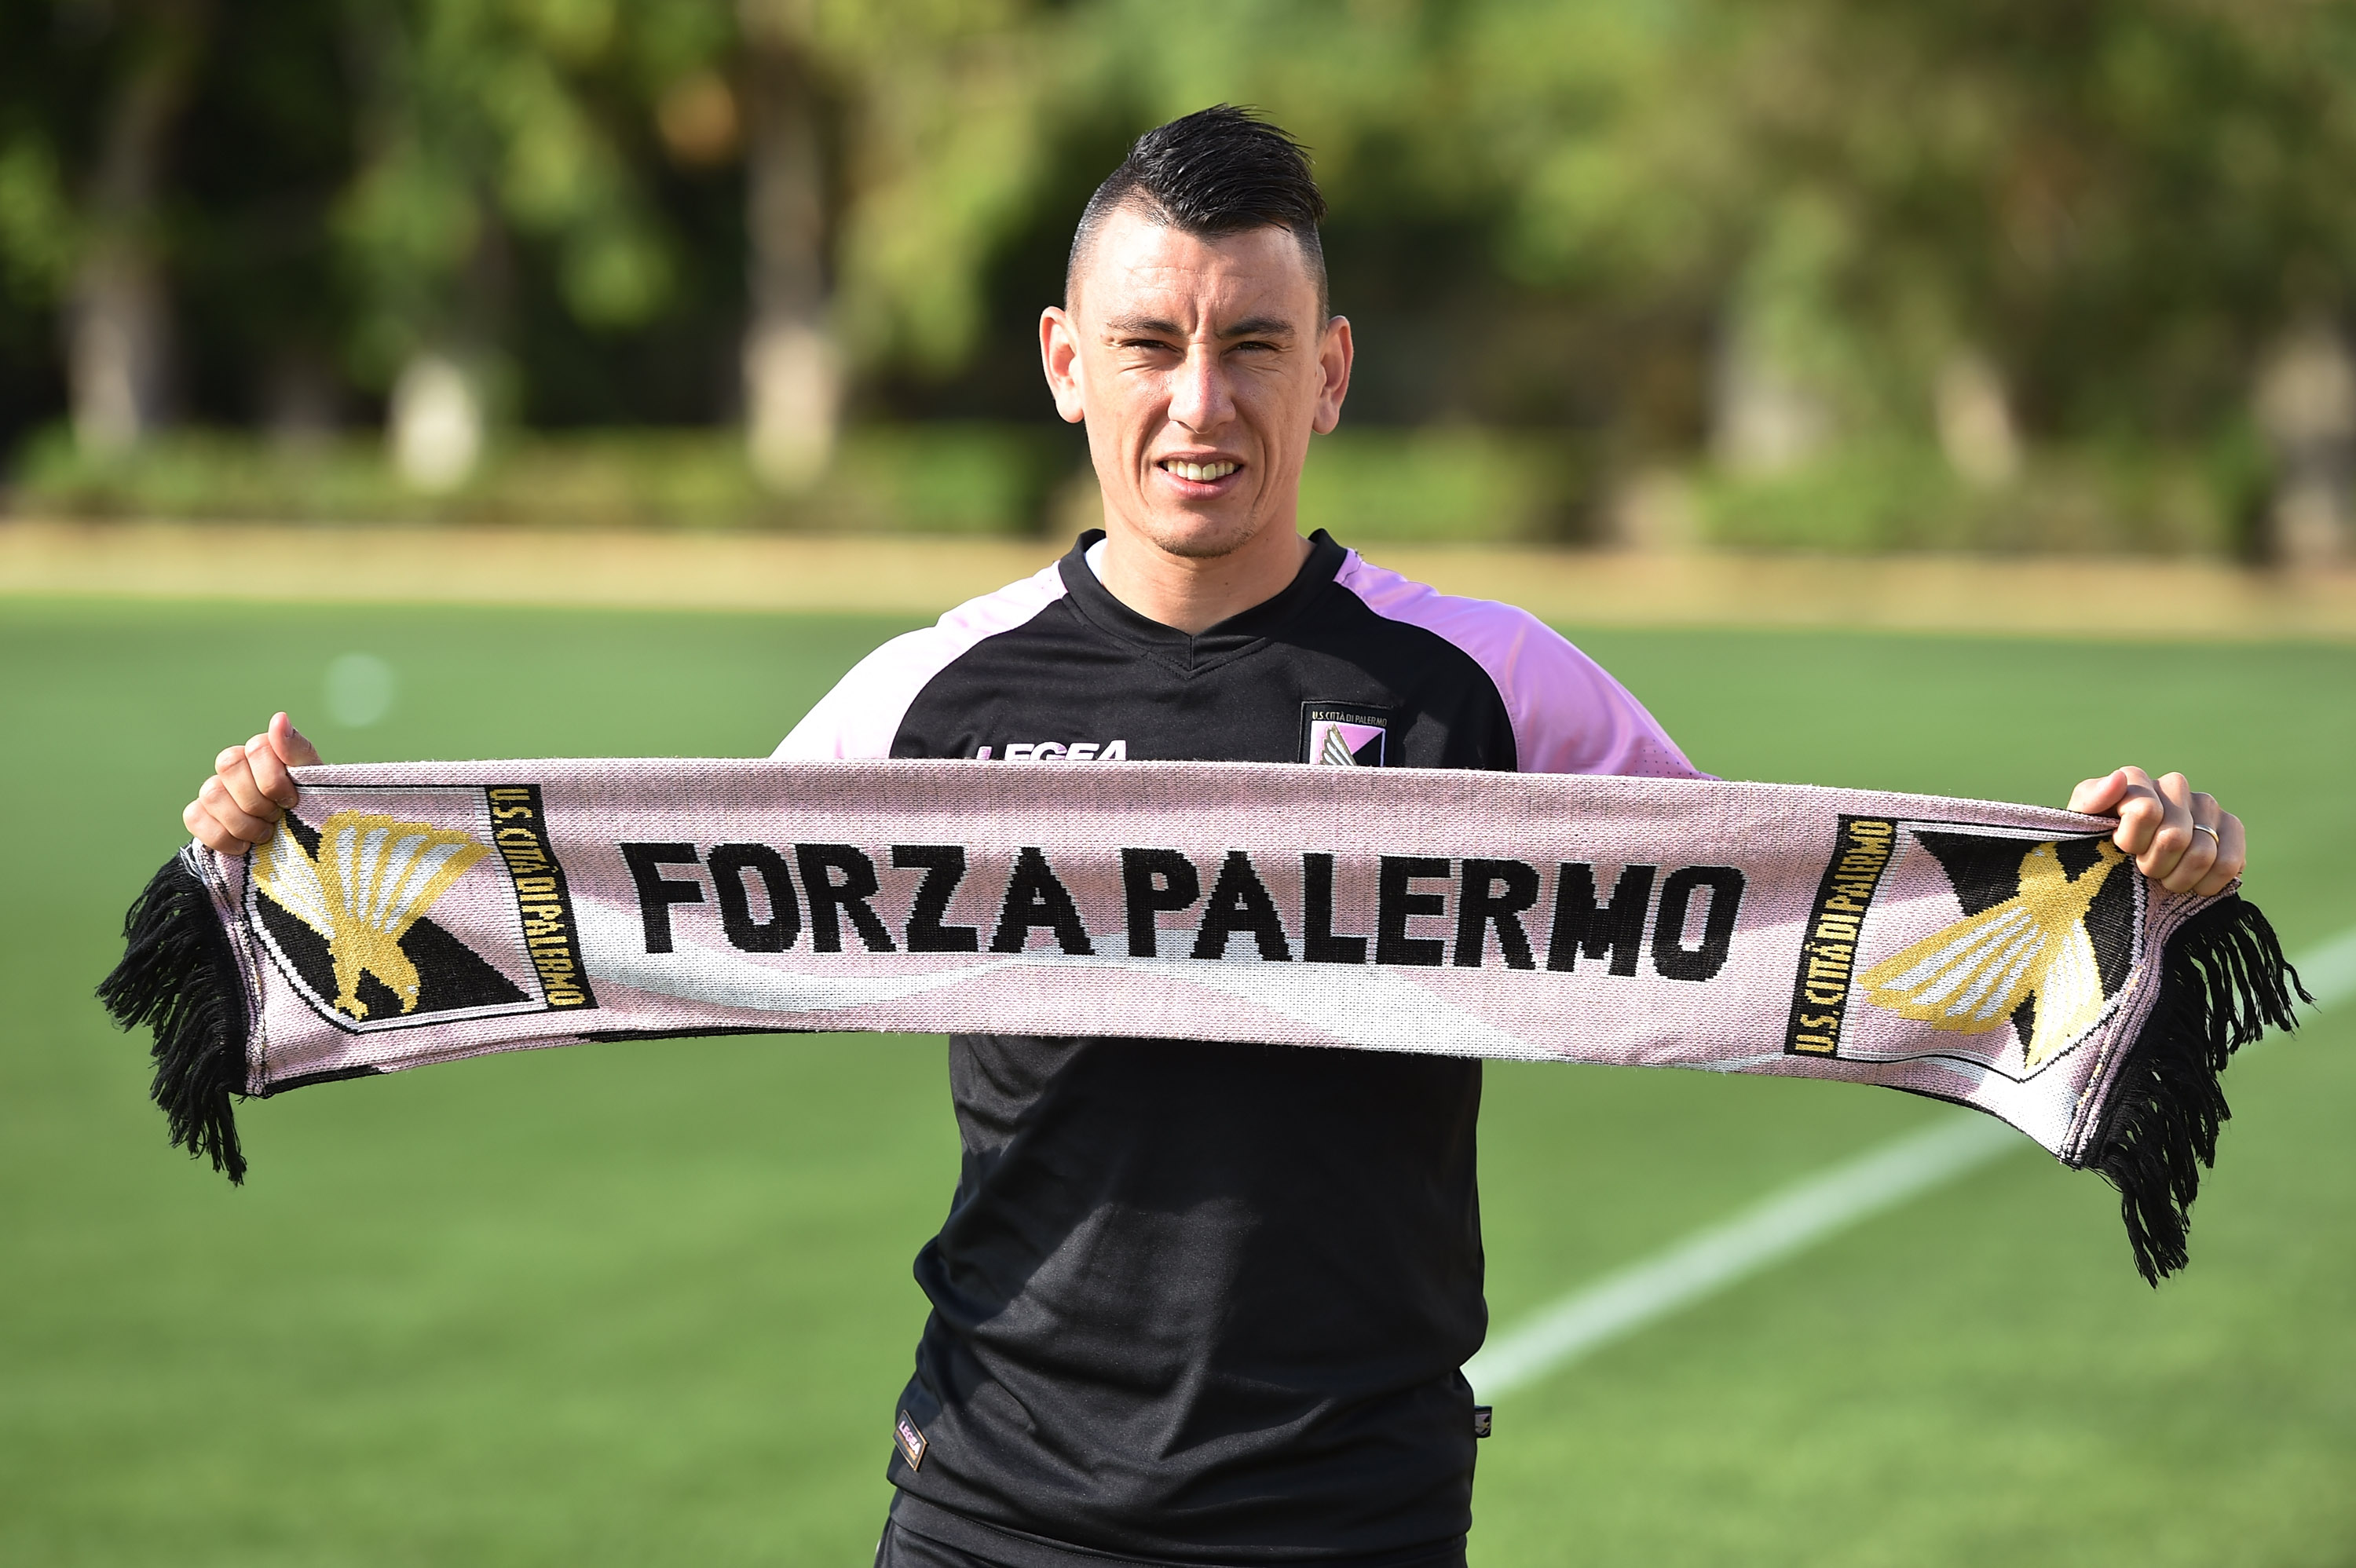 PALERMO, ITALY - AUGUST 16:  Cesar Falletti poses during his presentation as new player of US Citta' di Palermo at Carmelo Onorato training center on August 16, 2018 in Palermo, Italy.  (Photo by Tullio M. Puglia/Getty Images)